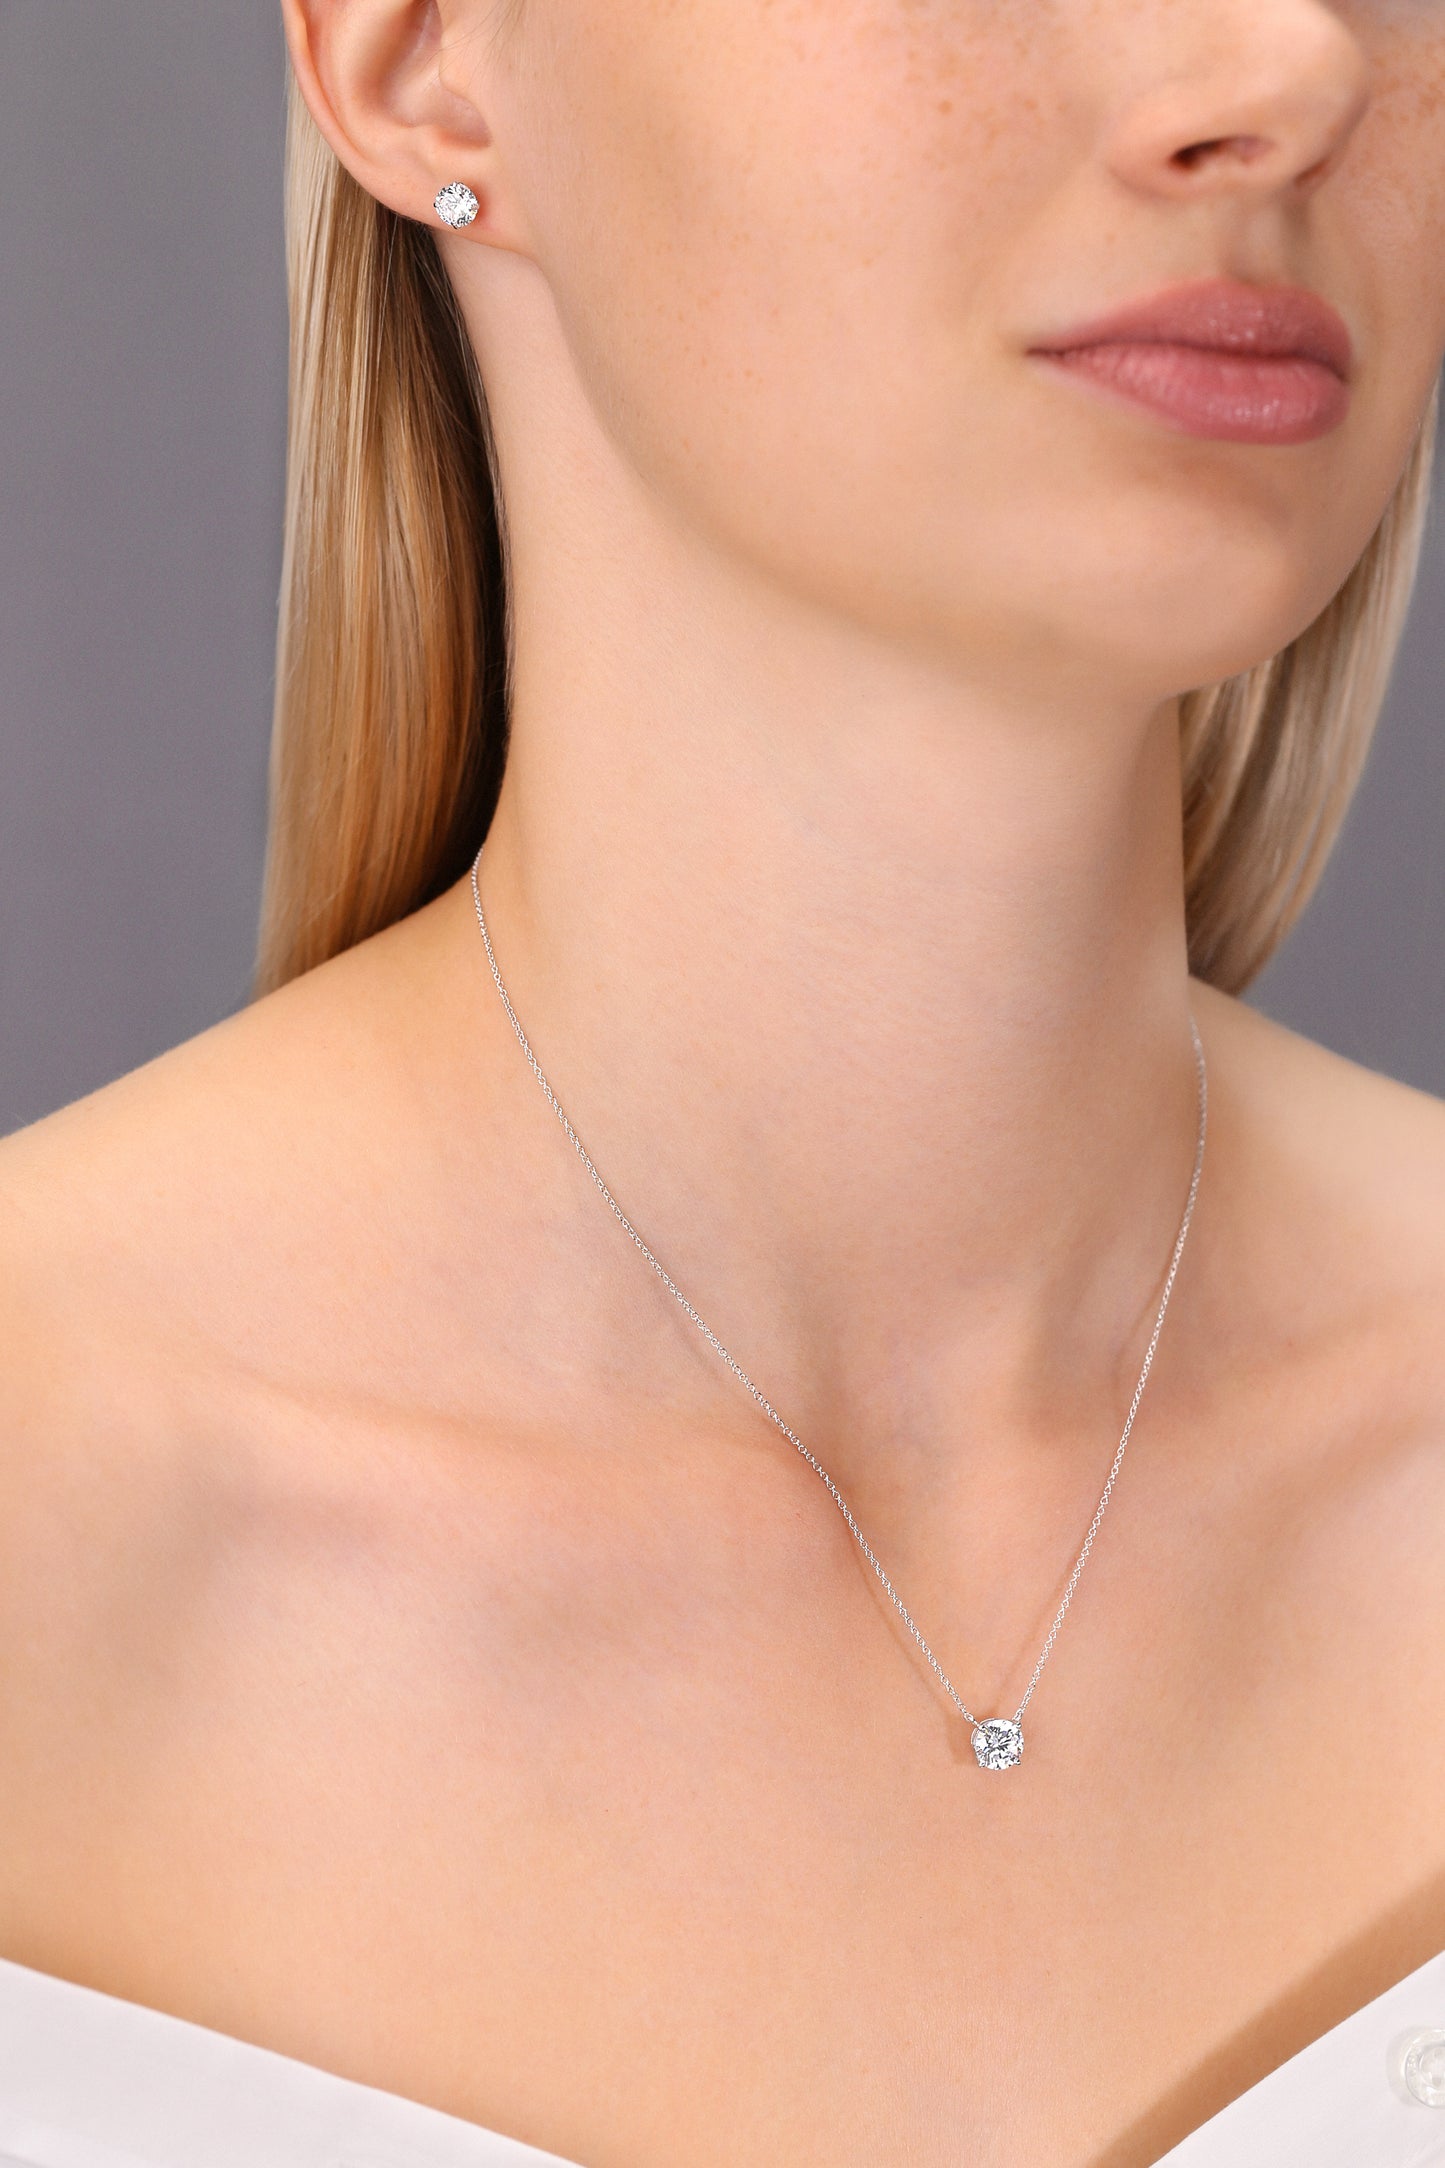 Sterling Silver Round Solitaire Necklace